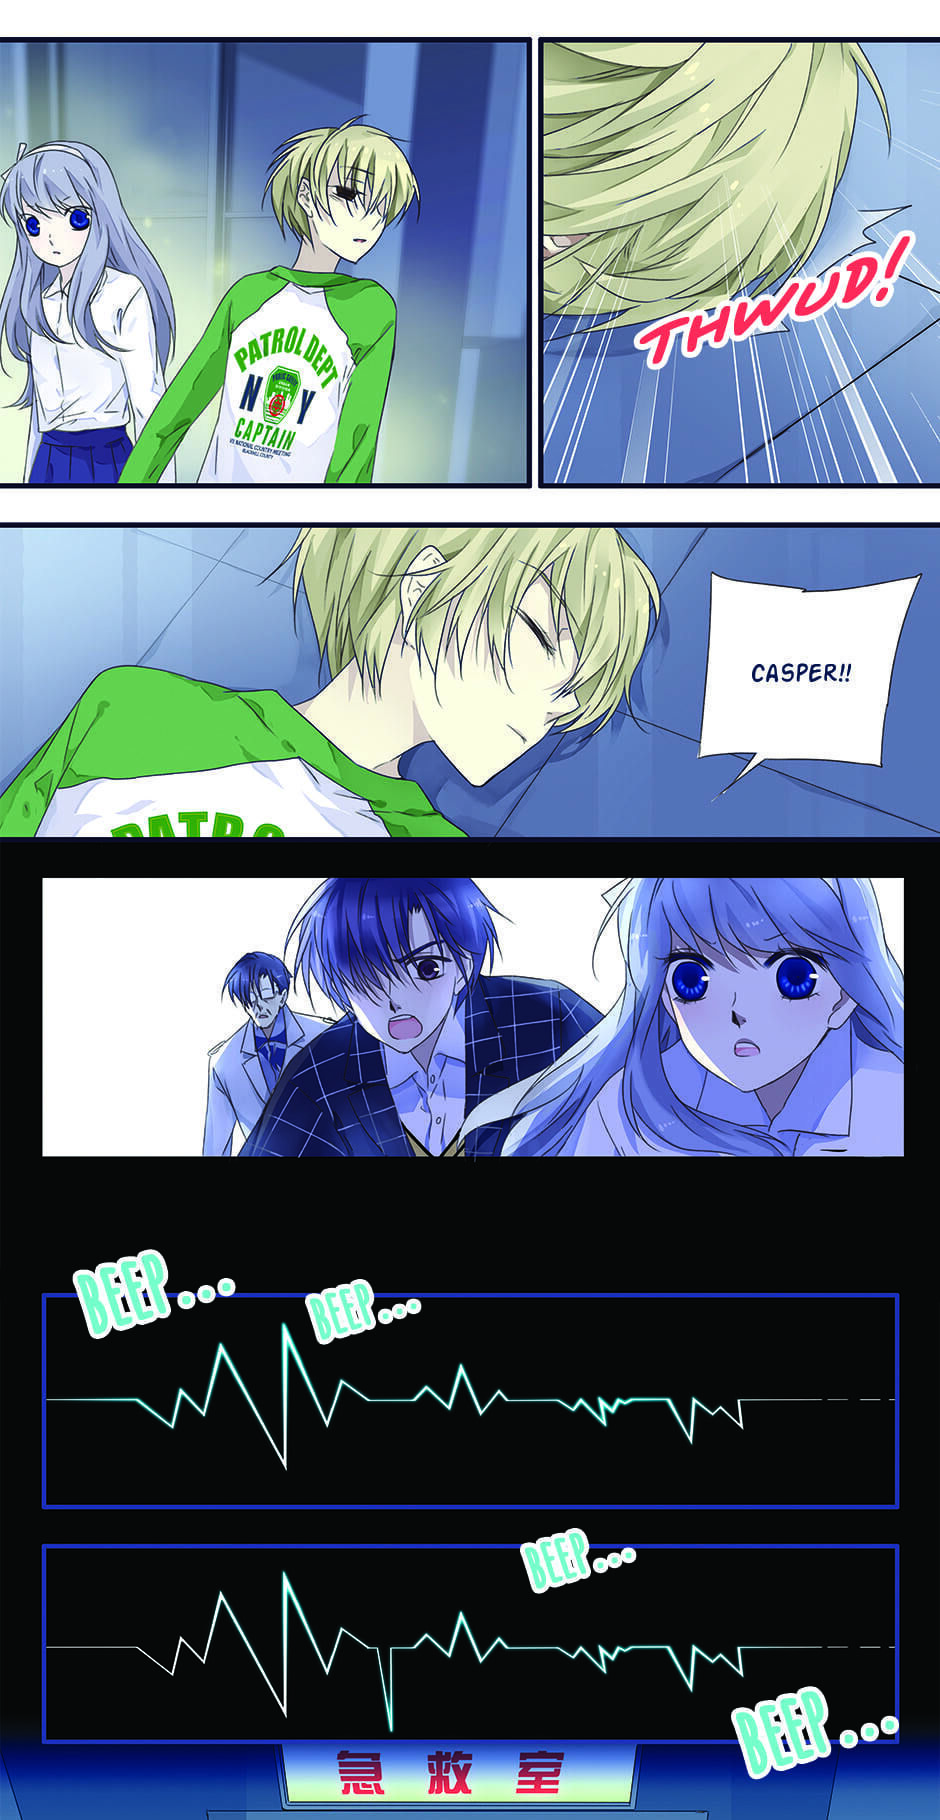 Blue Wings - Page 1